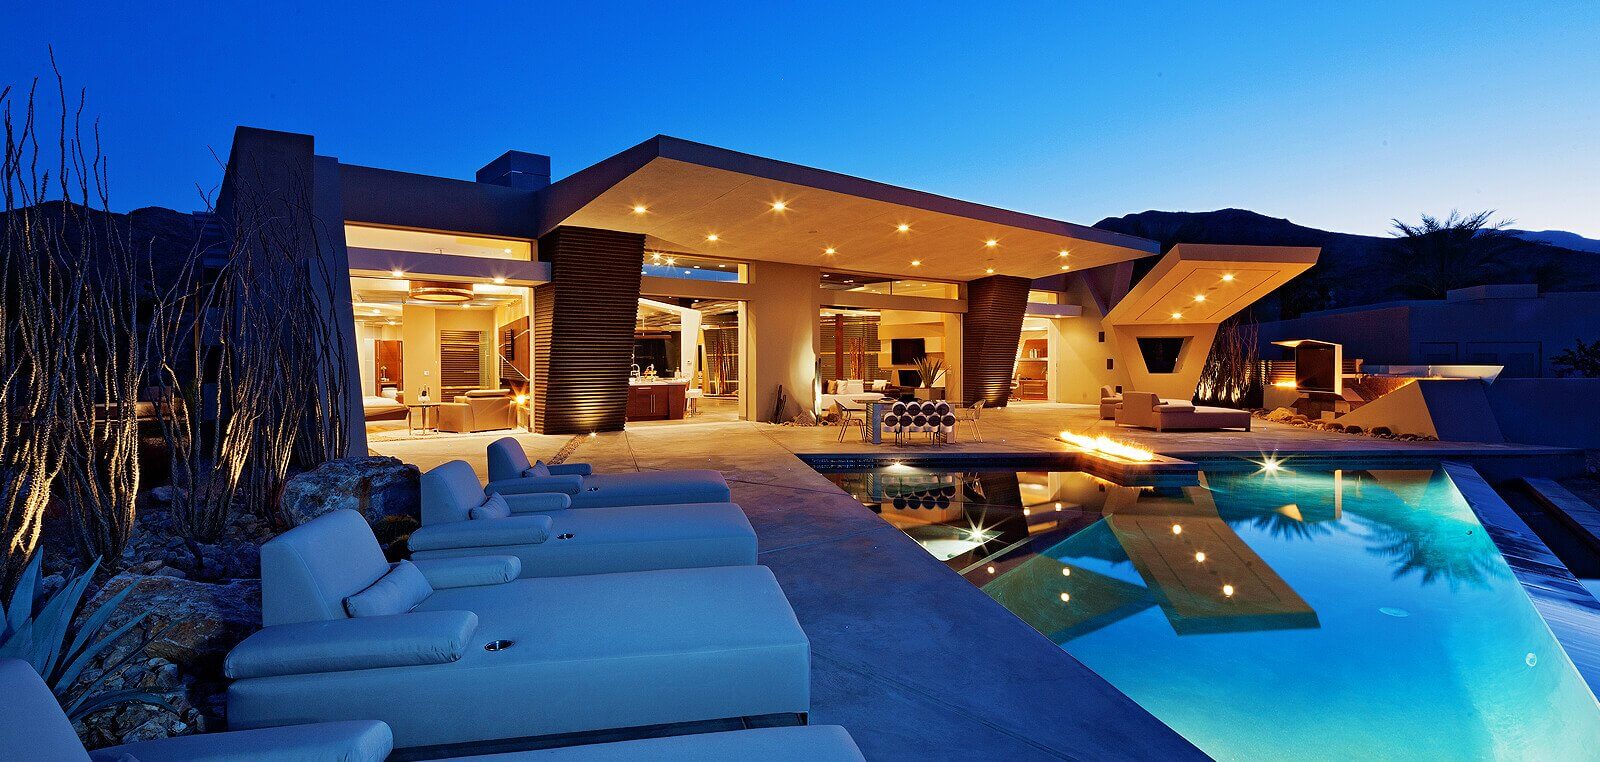 Luxury house with pool